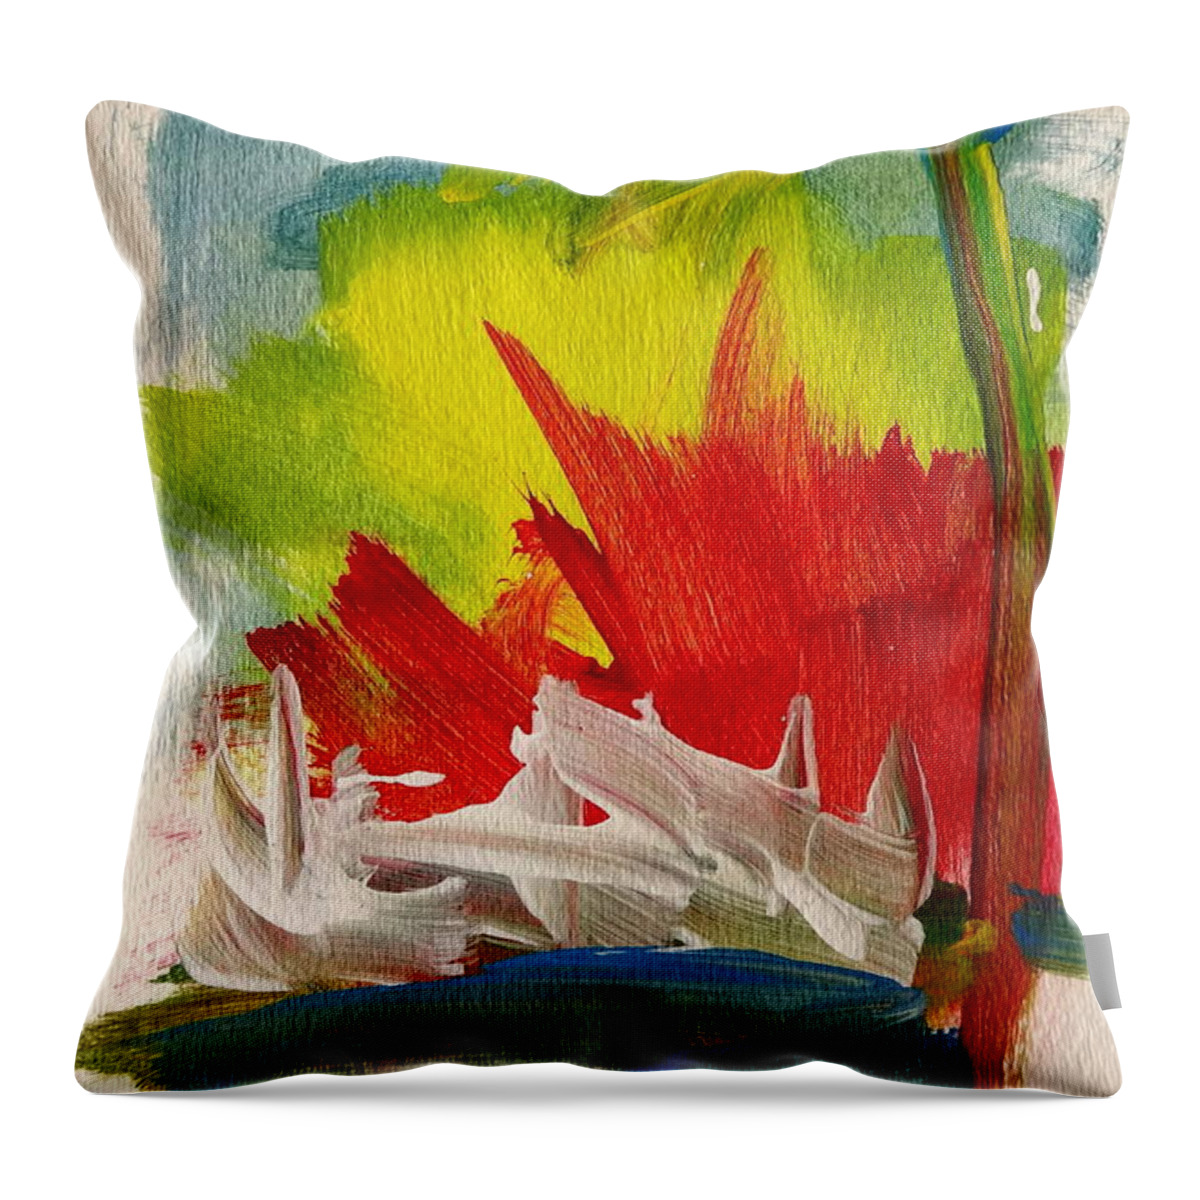 Tempera Throw Pillow featuring the painting Island Sunset by Fred Wilson